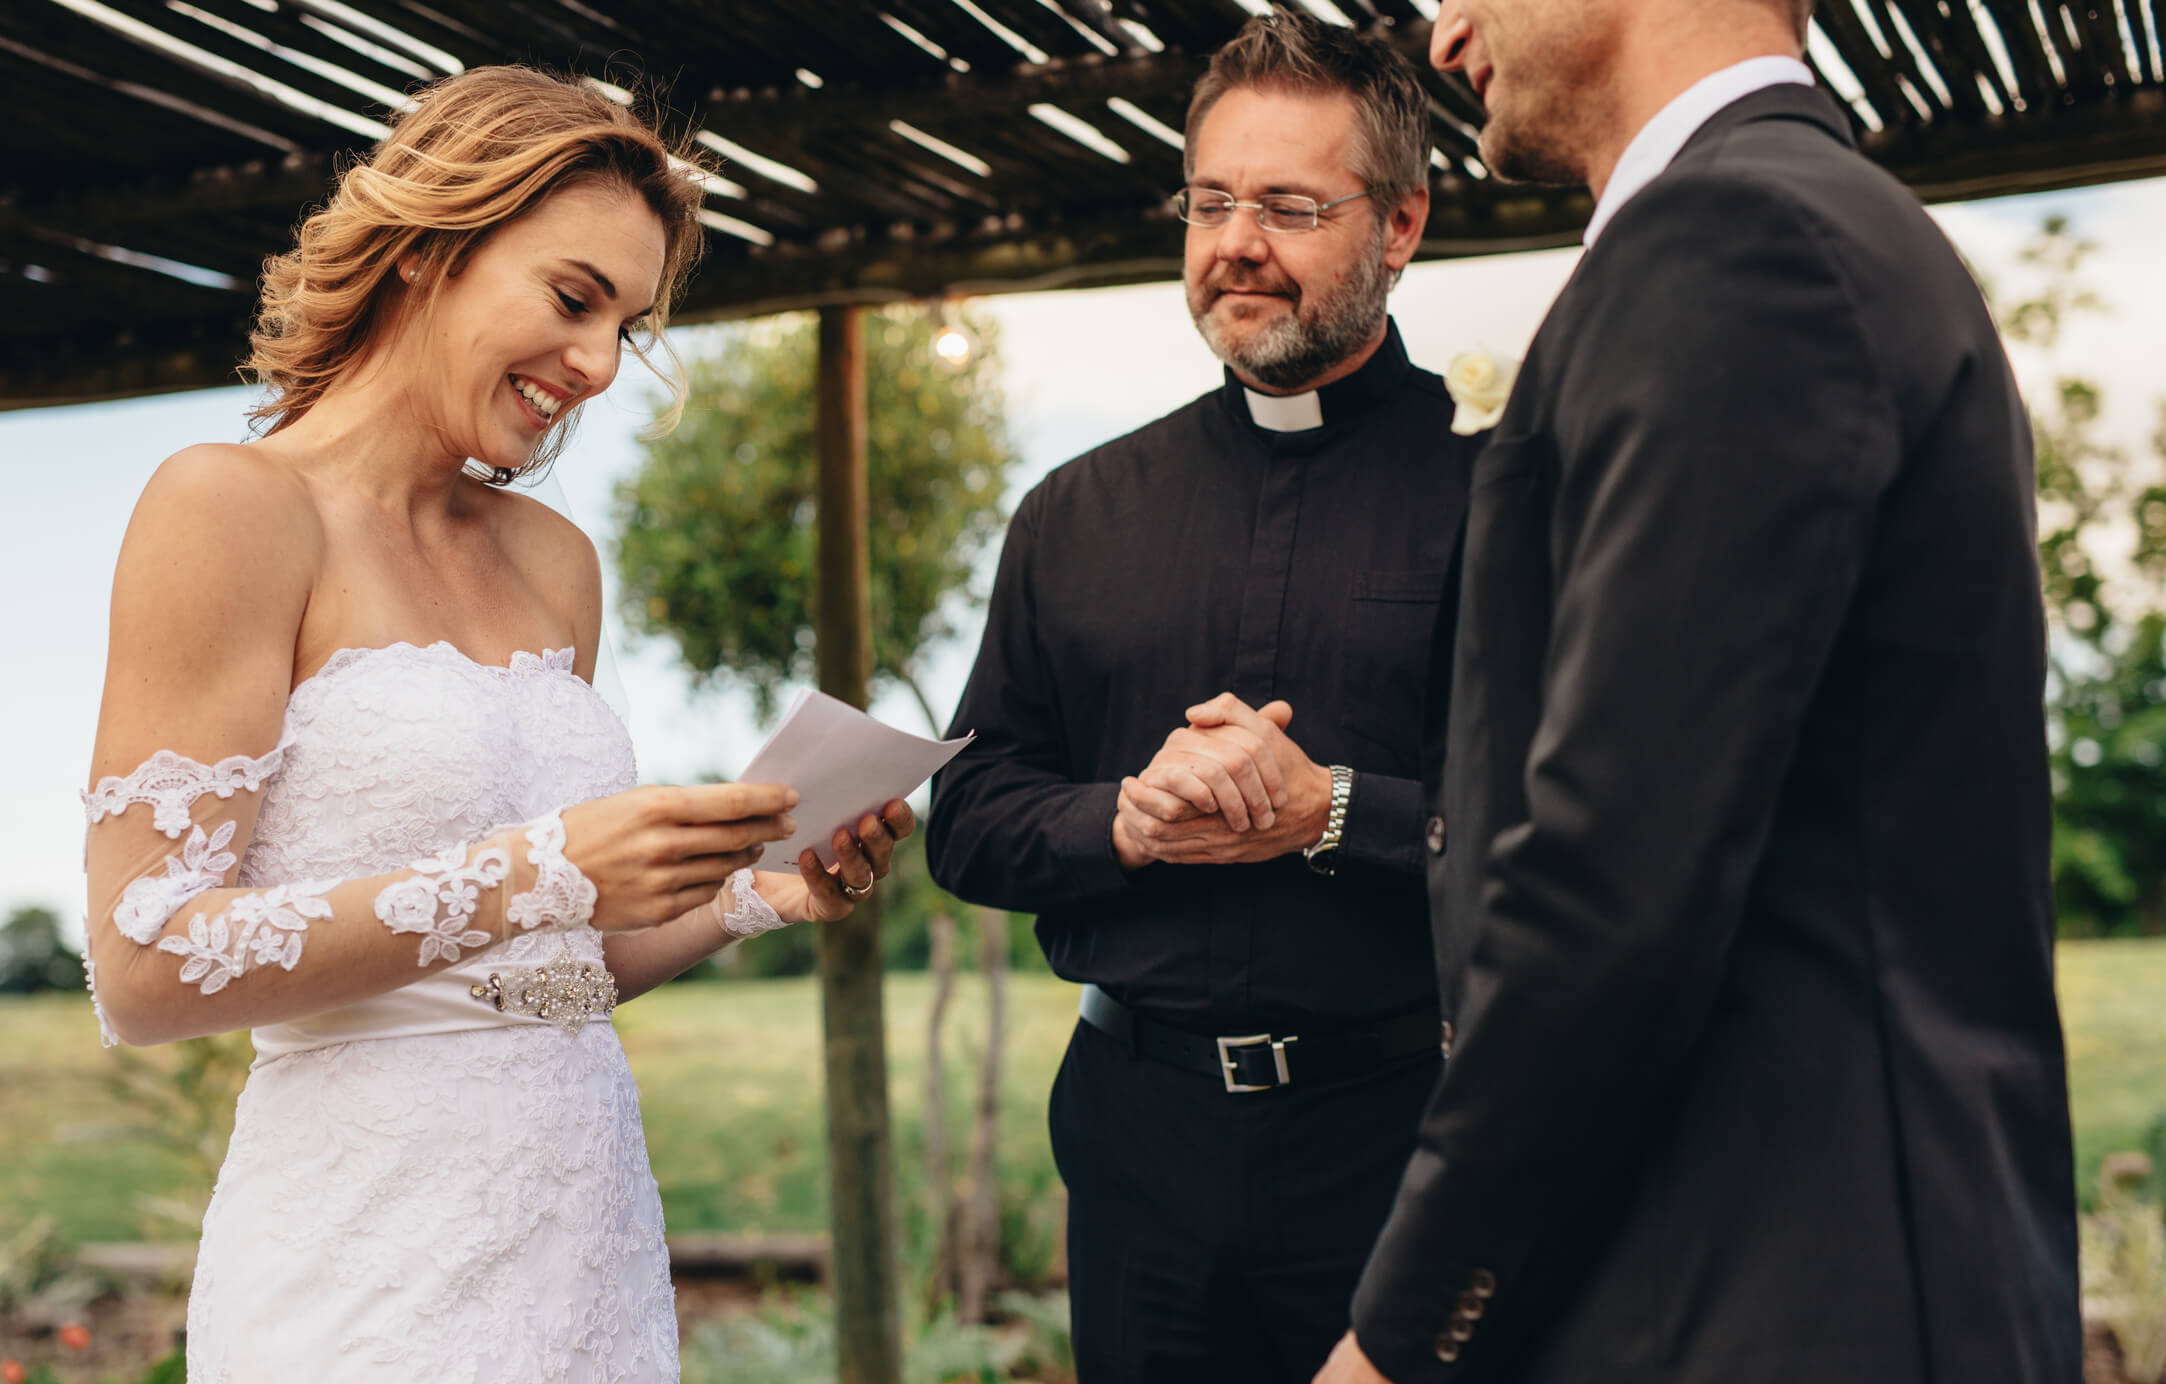 The price of saying 'I don't' to a friend's wedding